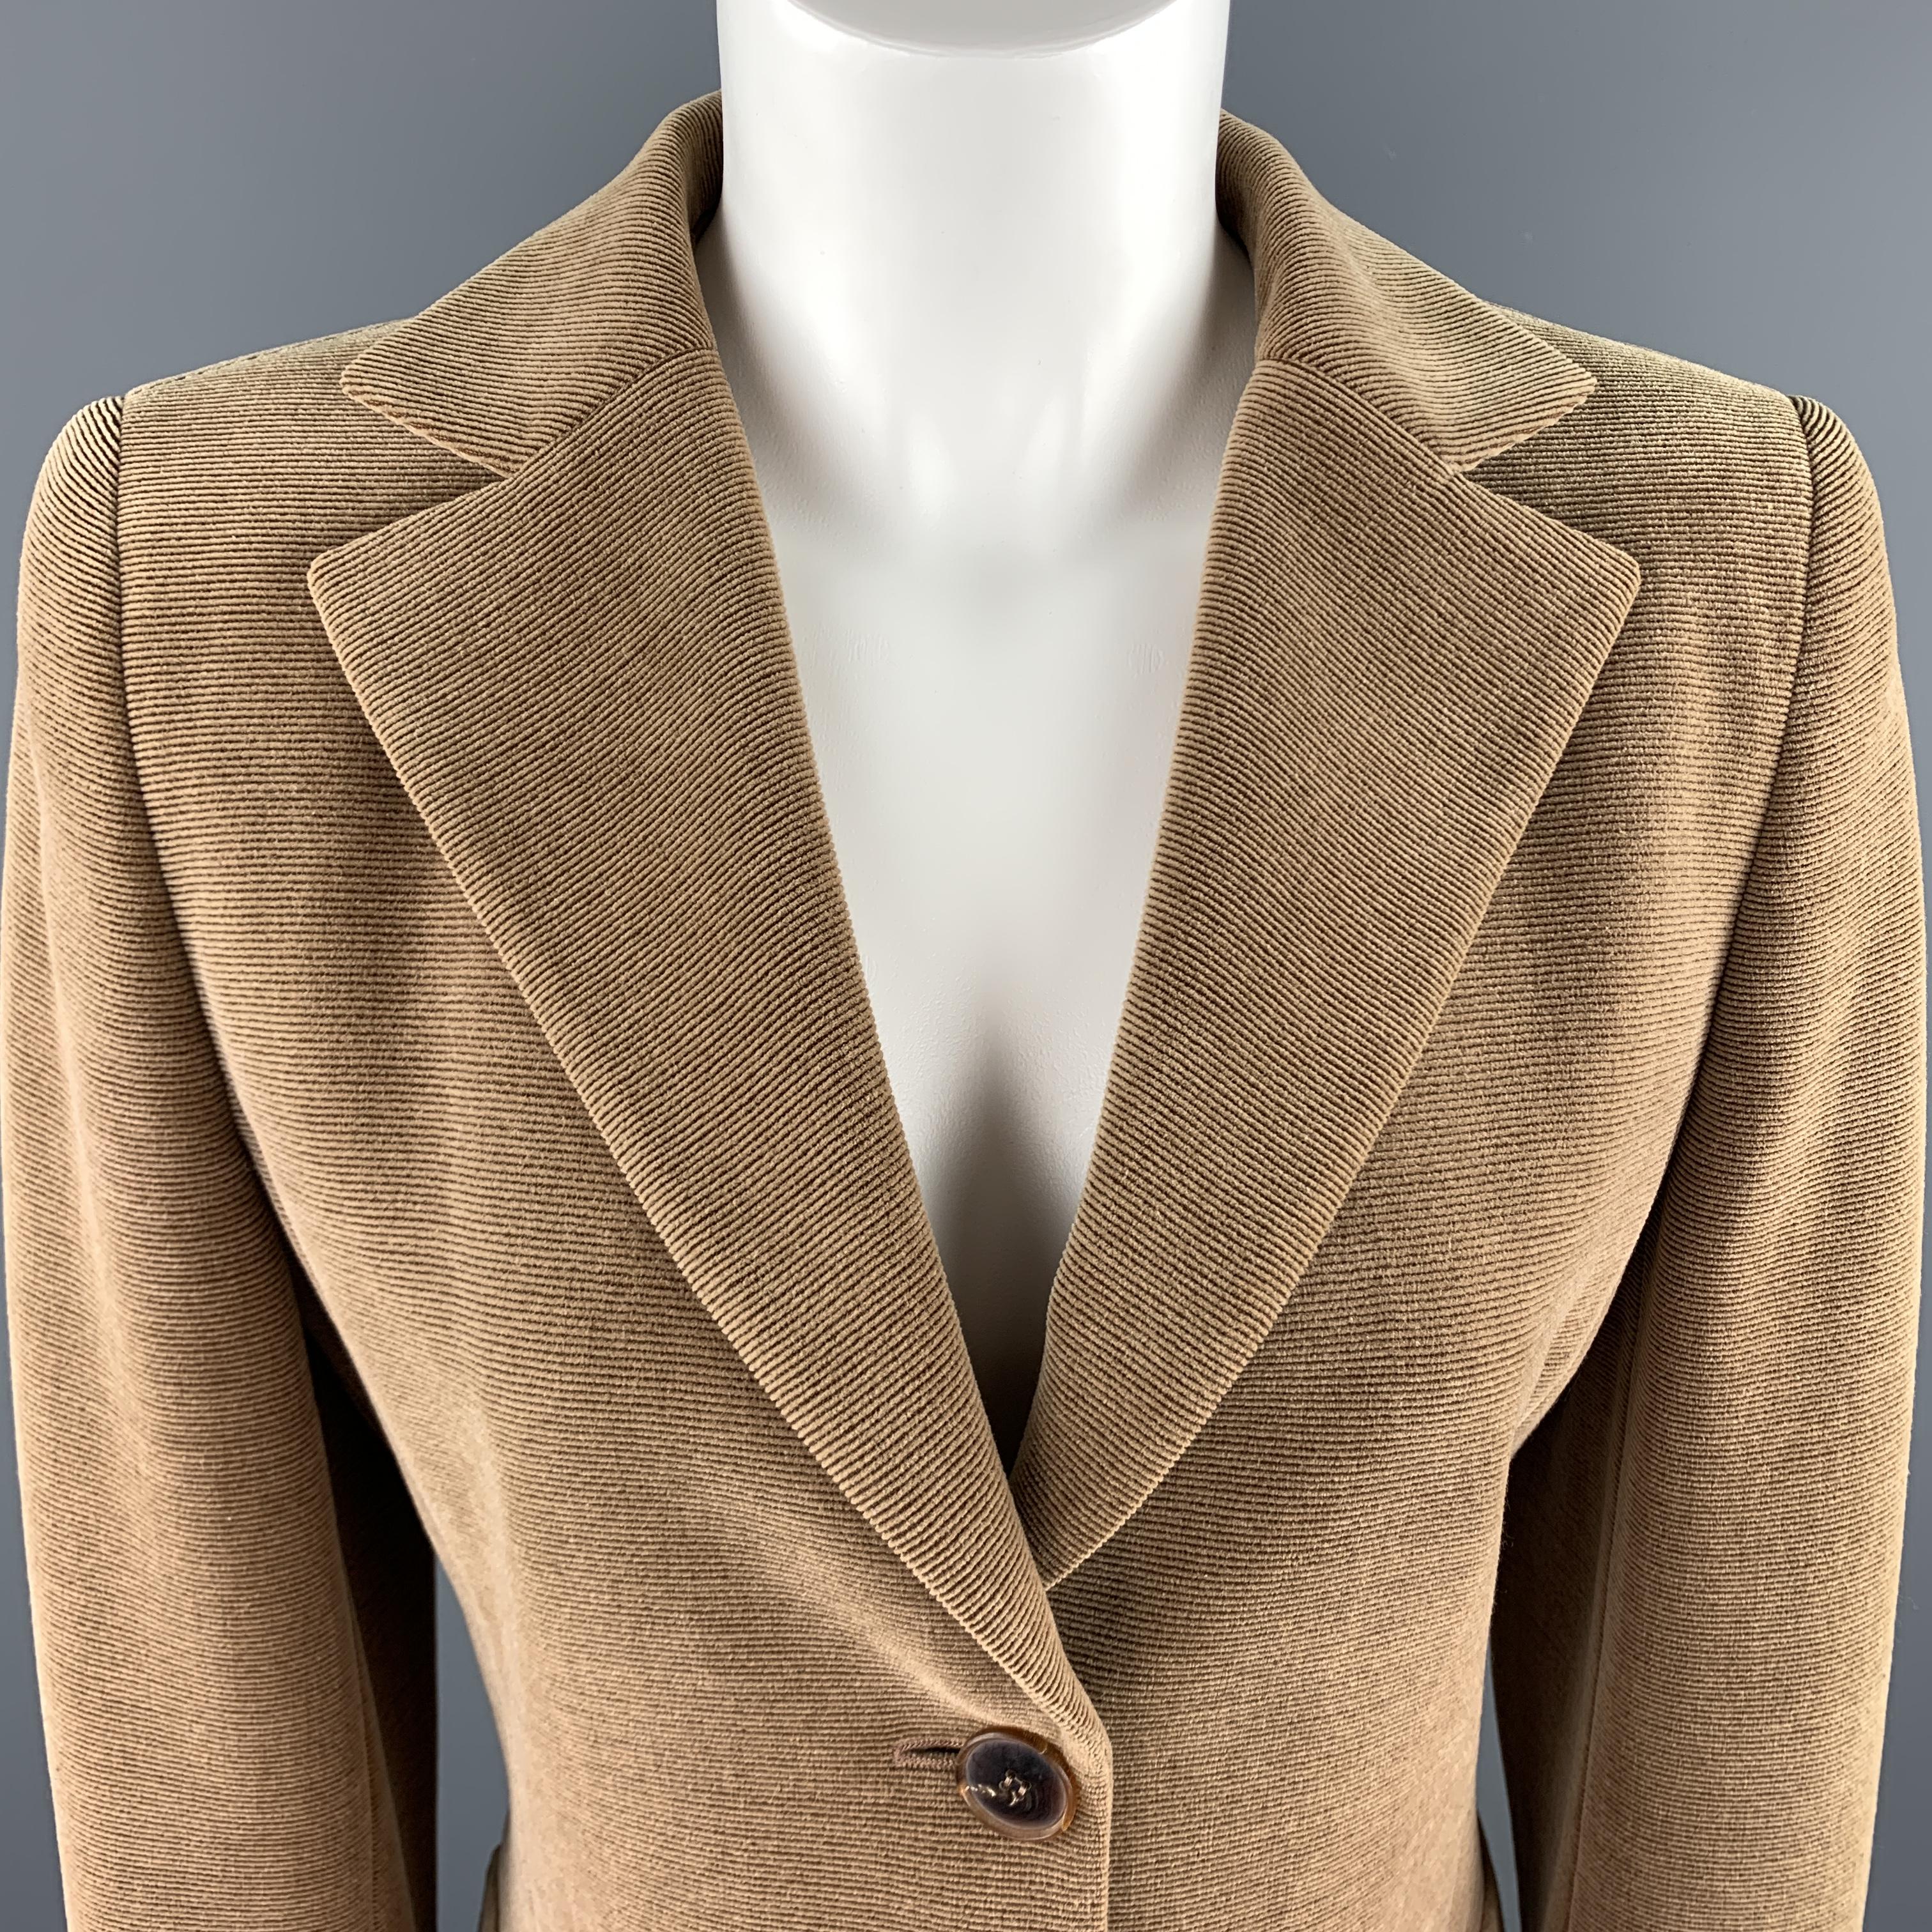 AKRIS blazer comes in tan wool blend corduroy with a notch lapel, single breasted two button font, and ventless back. Made in Switzerland.

Very Good Pre-Owned Condition.
Marked: US 8

Measurements:

Shoulder: 18 in.
Bust: 36 in.
Sleeve: 24